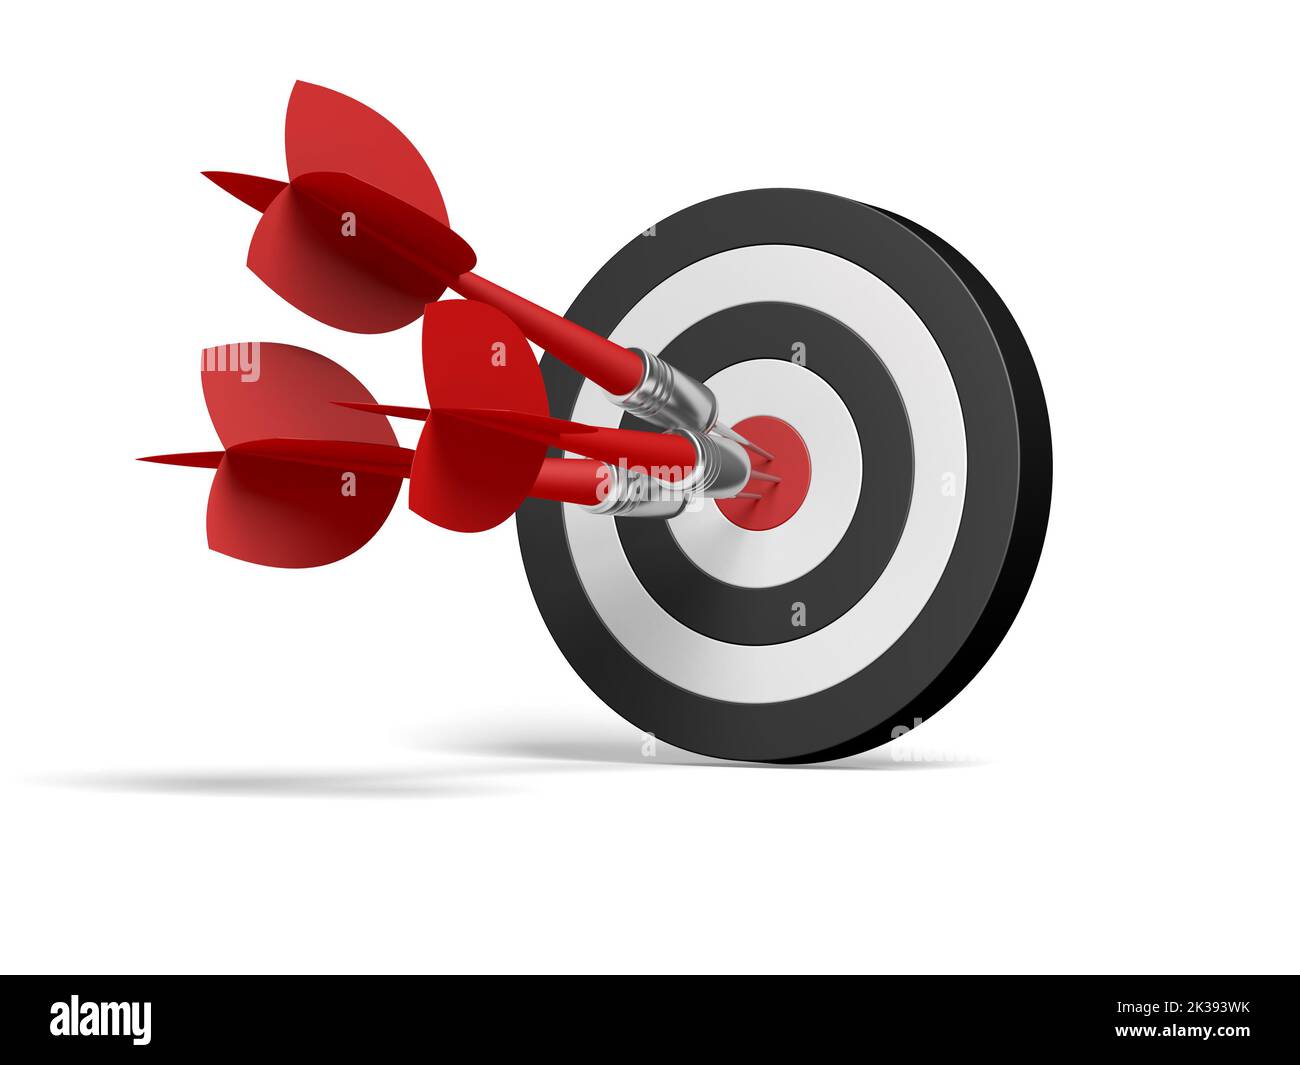 Dartboard with three red darts isolated on white background. Success concept. 3d illustration. Stock Photo